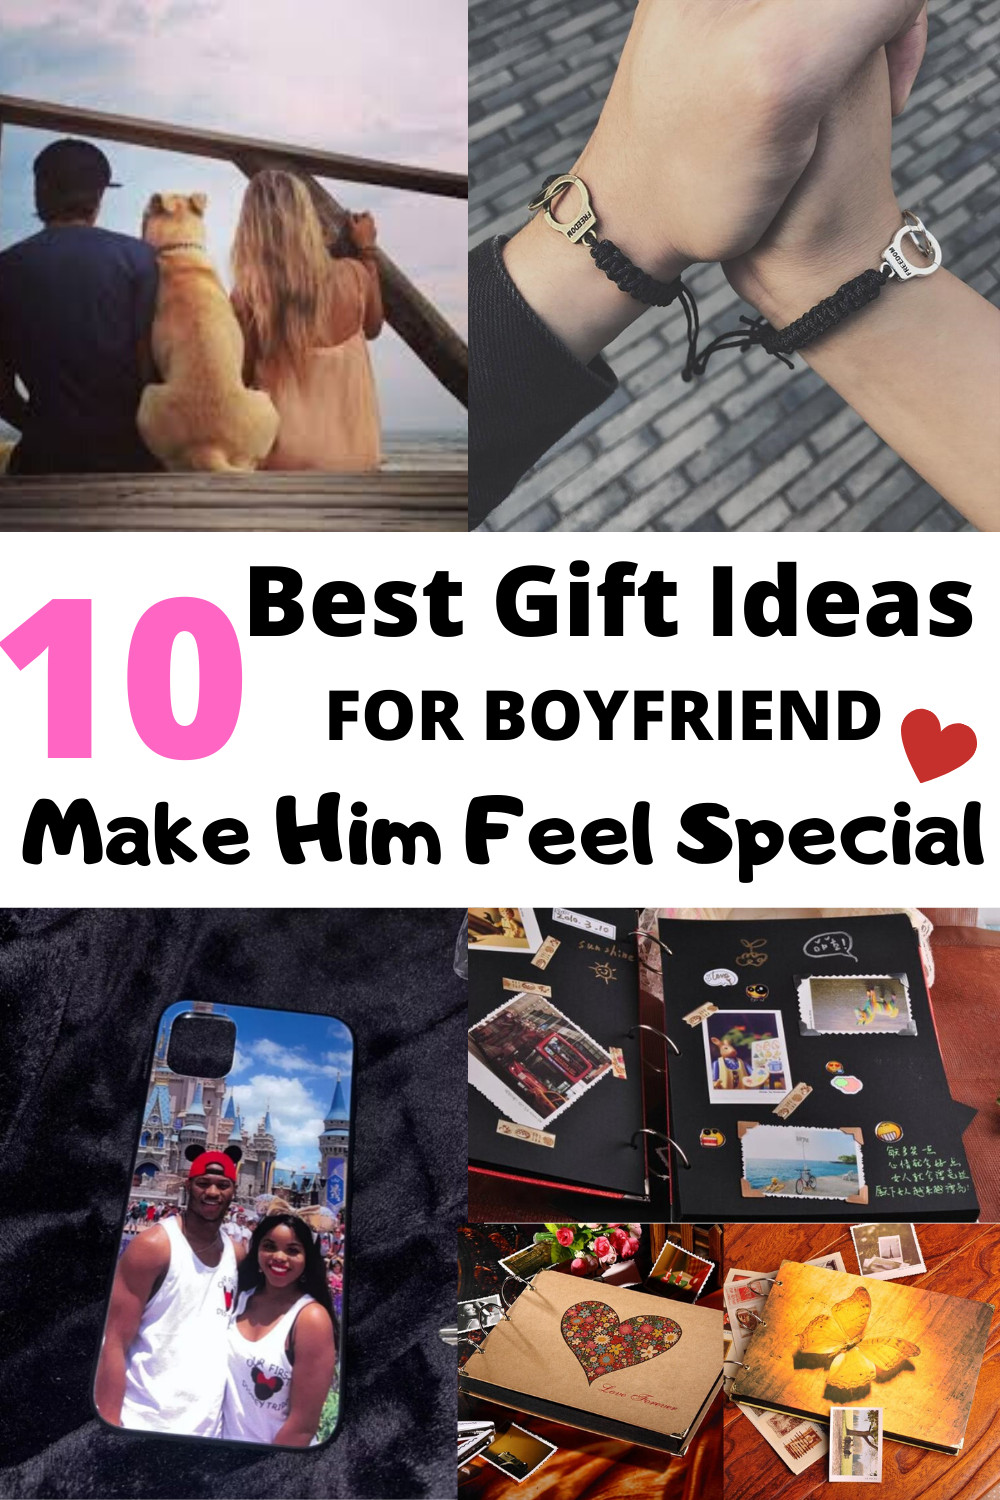 Meaningful Gift Ideas For Boyfriend
 23 Special Christmas Gifts Ideas For Your Boyfriend